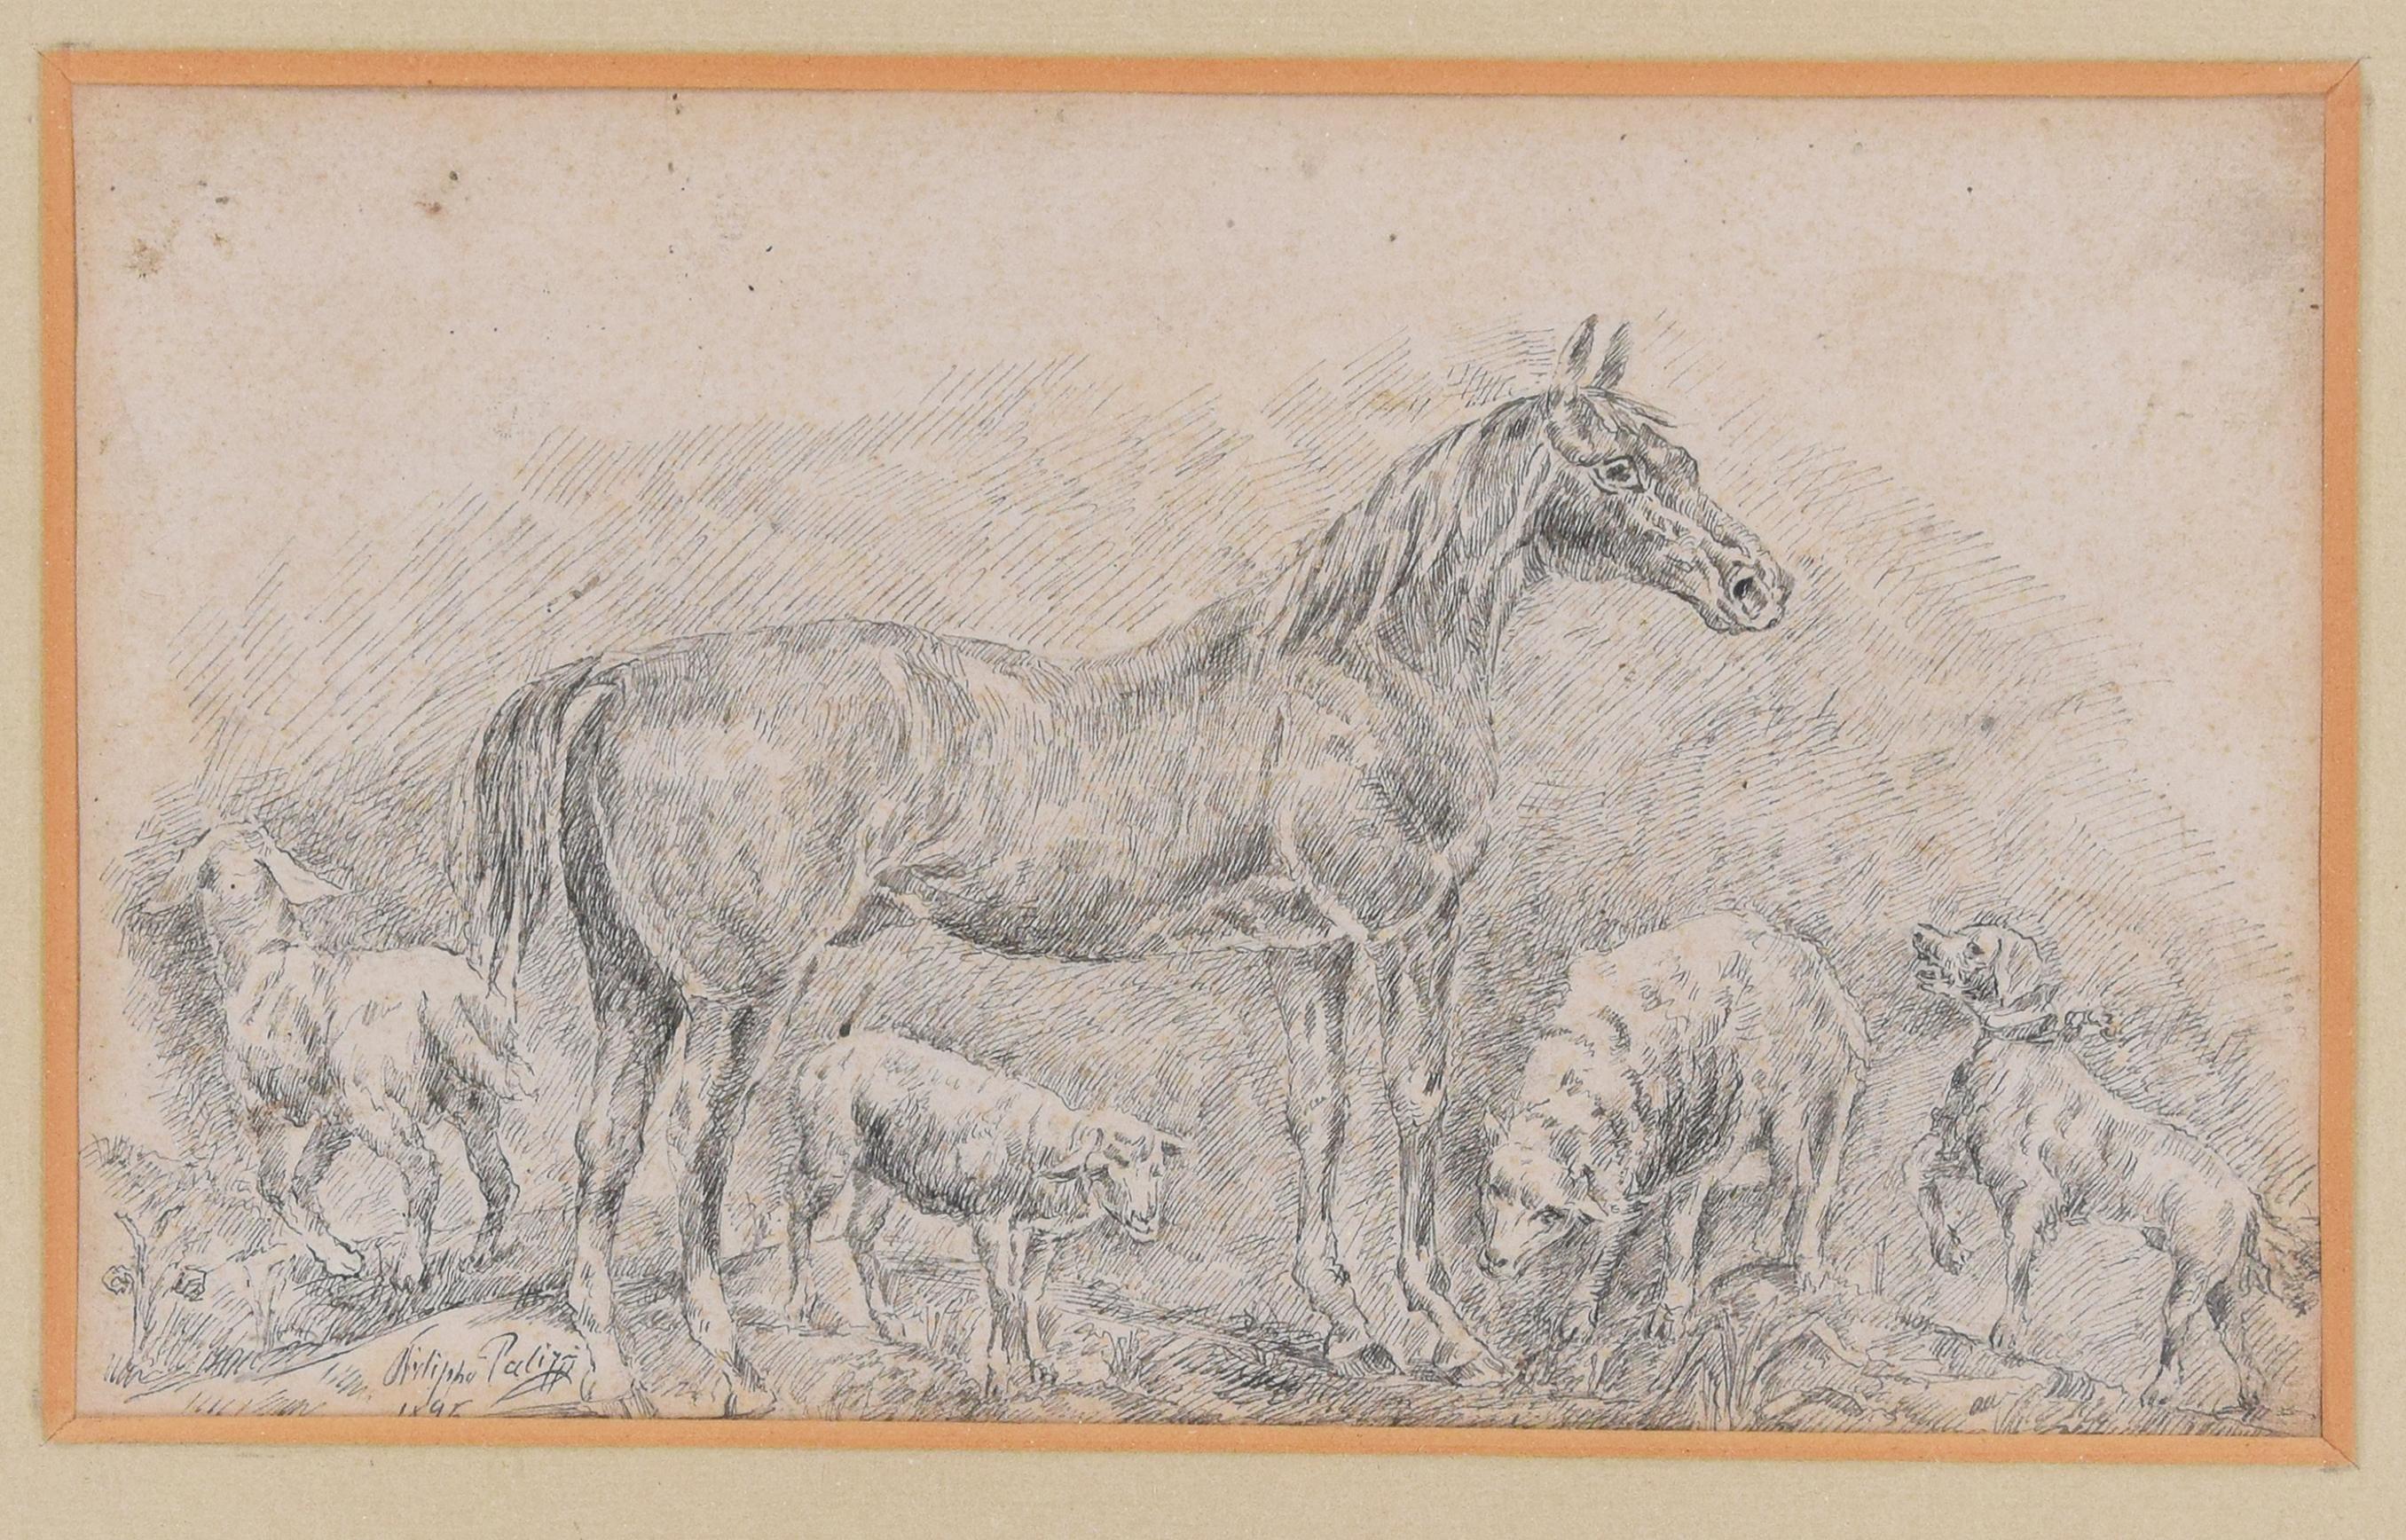 Horse with Herds - China Ink Drawing by Filippo Palizzi - 1895